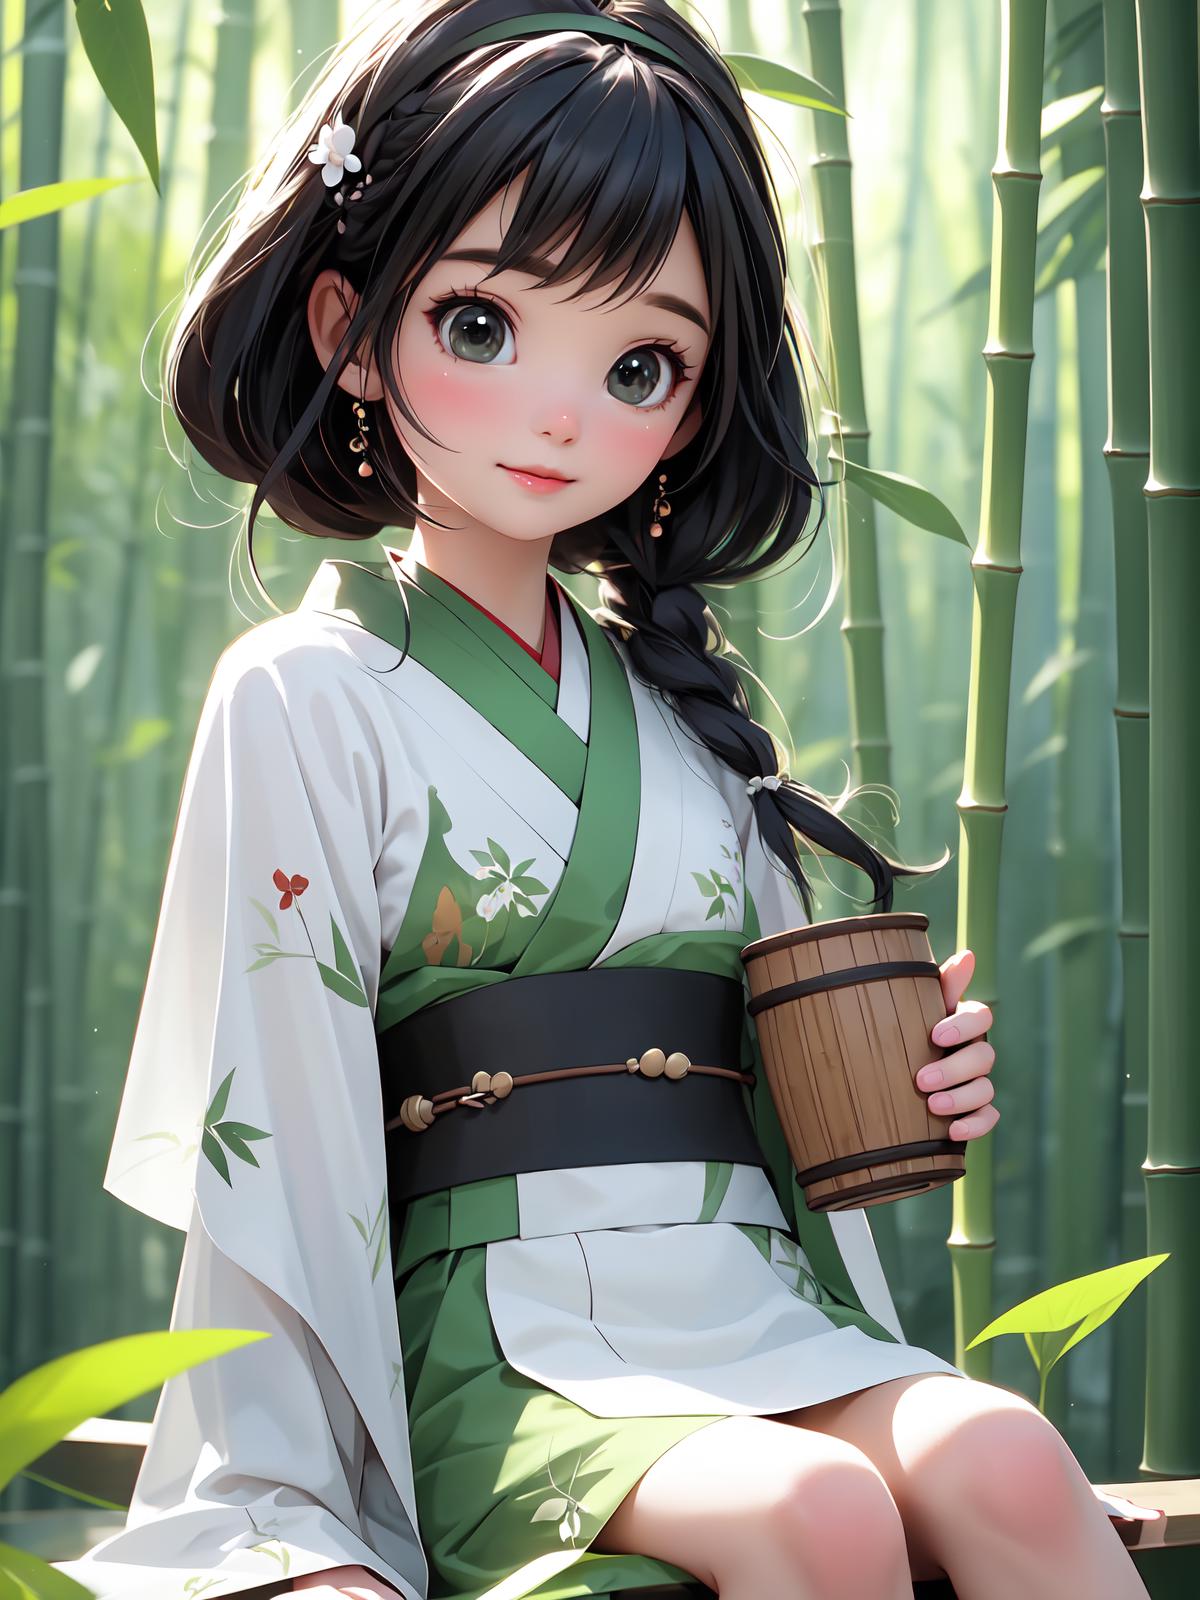 Cute girl in the bamboo forest image by ZIJINcreativity